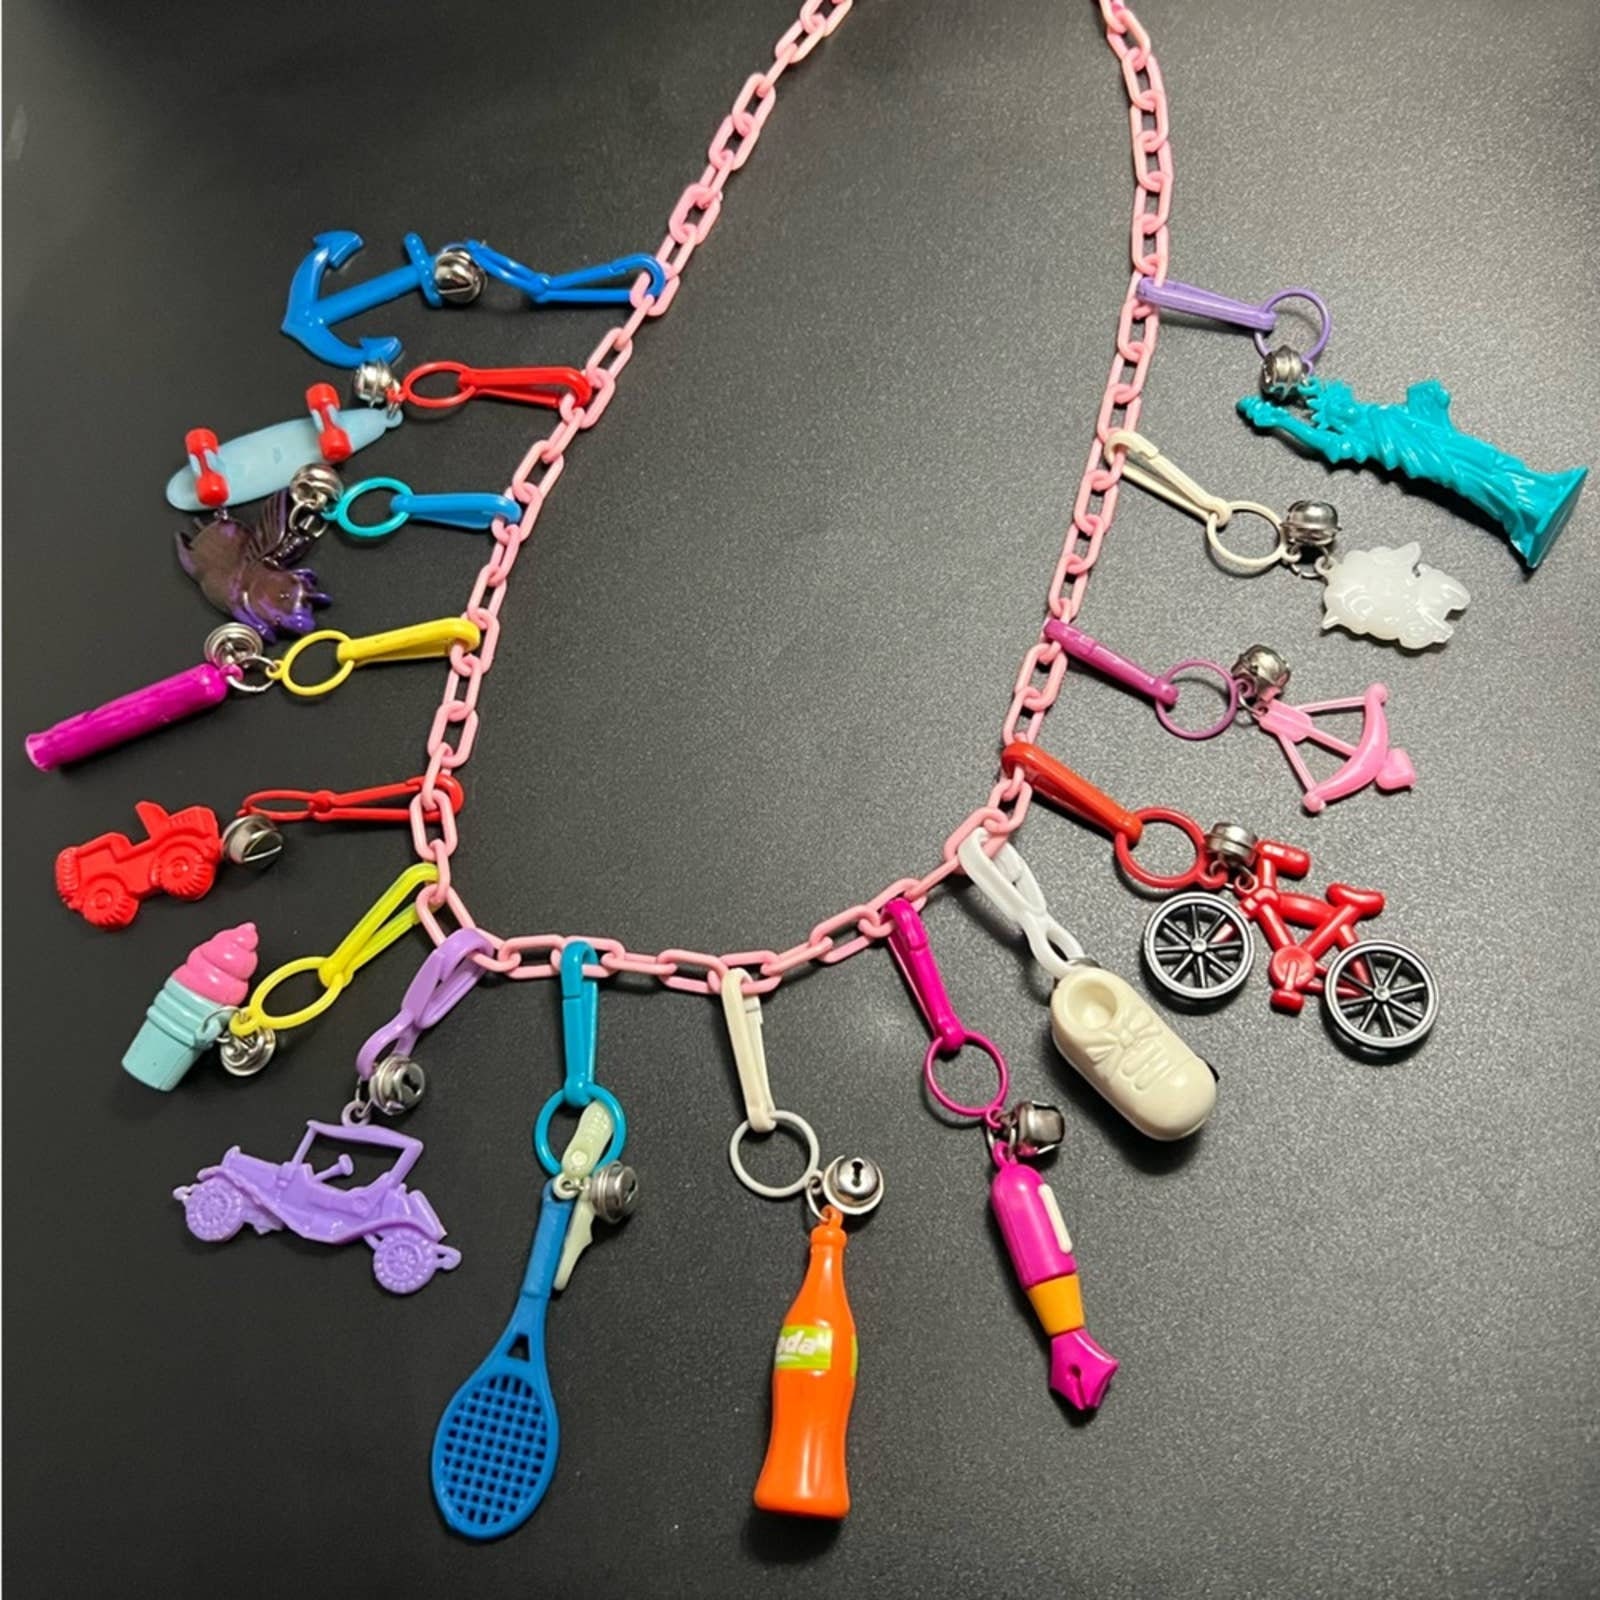 1980's Clip Charms With Bells, Snow Skis, Baby Bottle, Strawberries, Duck  and More on White Plastic Chain Necklace 